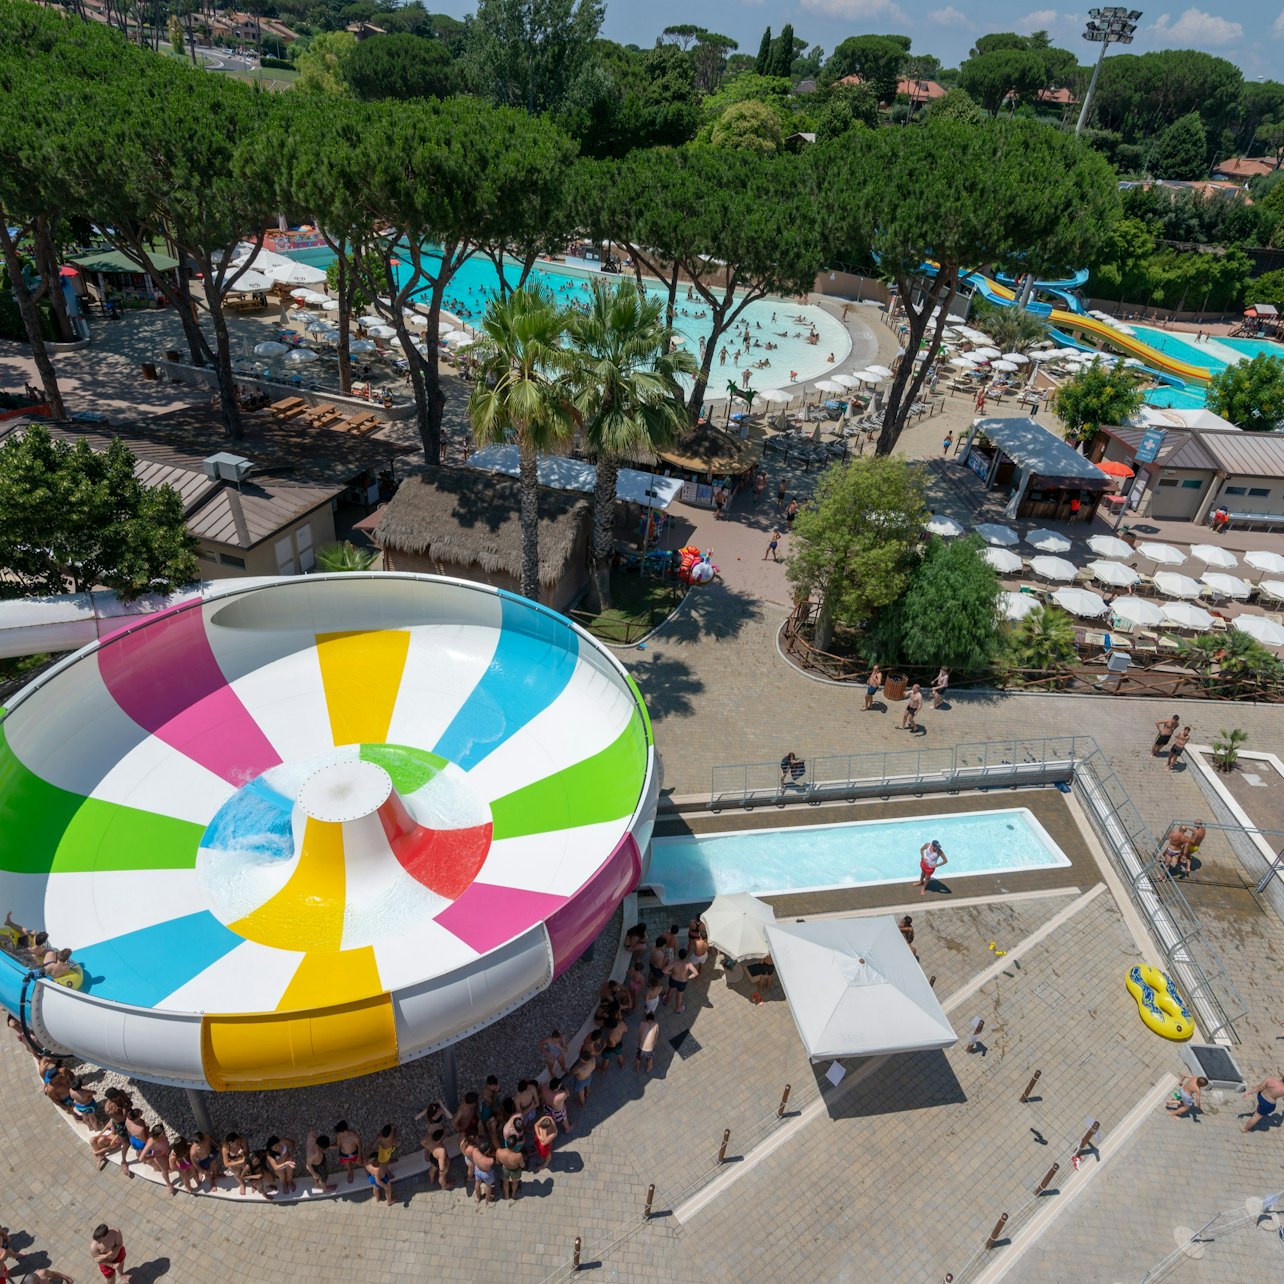 Hydromania: The Waterpark of Rome - Accommodations in Rome